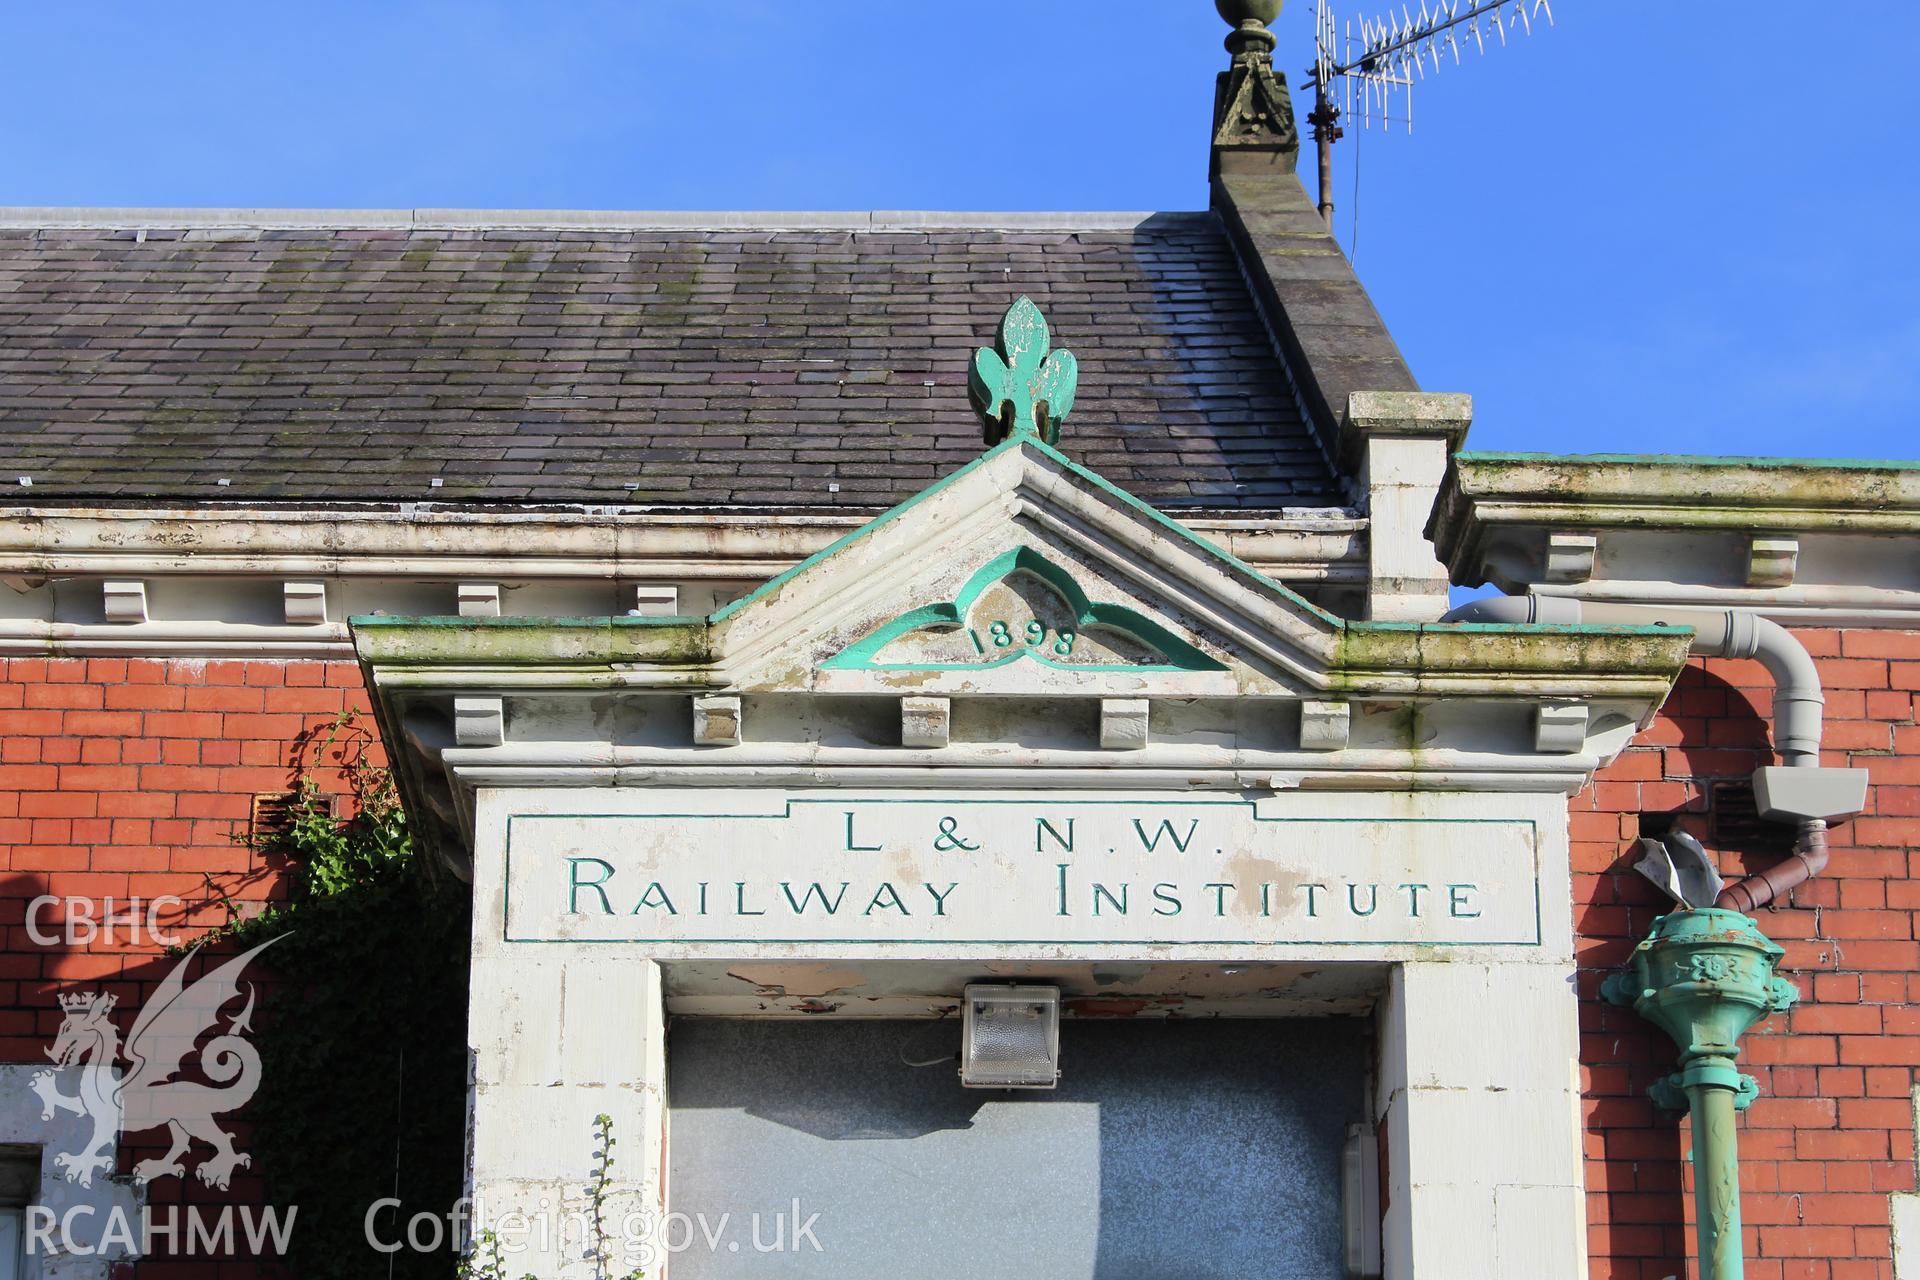 Detailed view of writing above entrance at the Railway Institute, Bangor. Photographed during survey conducted by Sue Fielding for the RCAHMW on 4th April 2016. Transcript: "1898 / L & N. W. / Railway Institute"